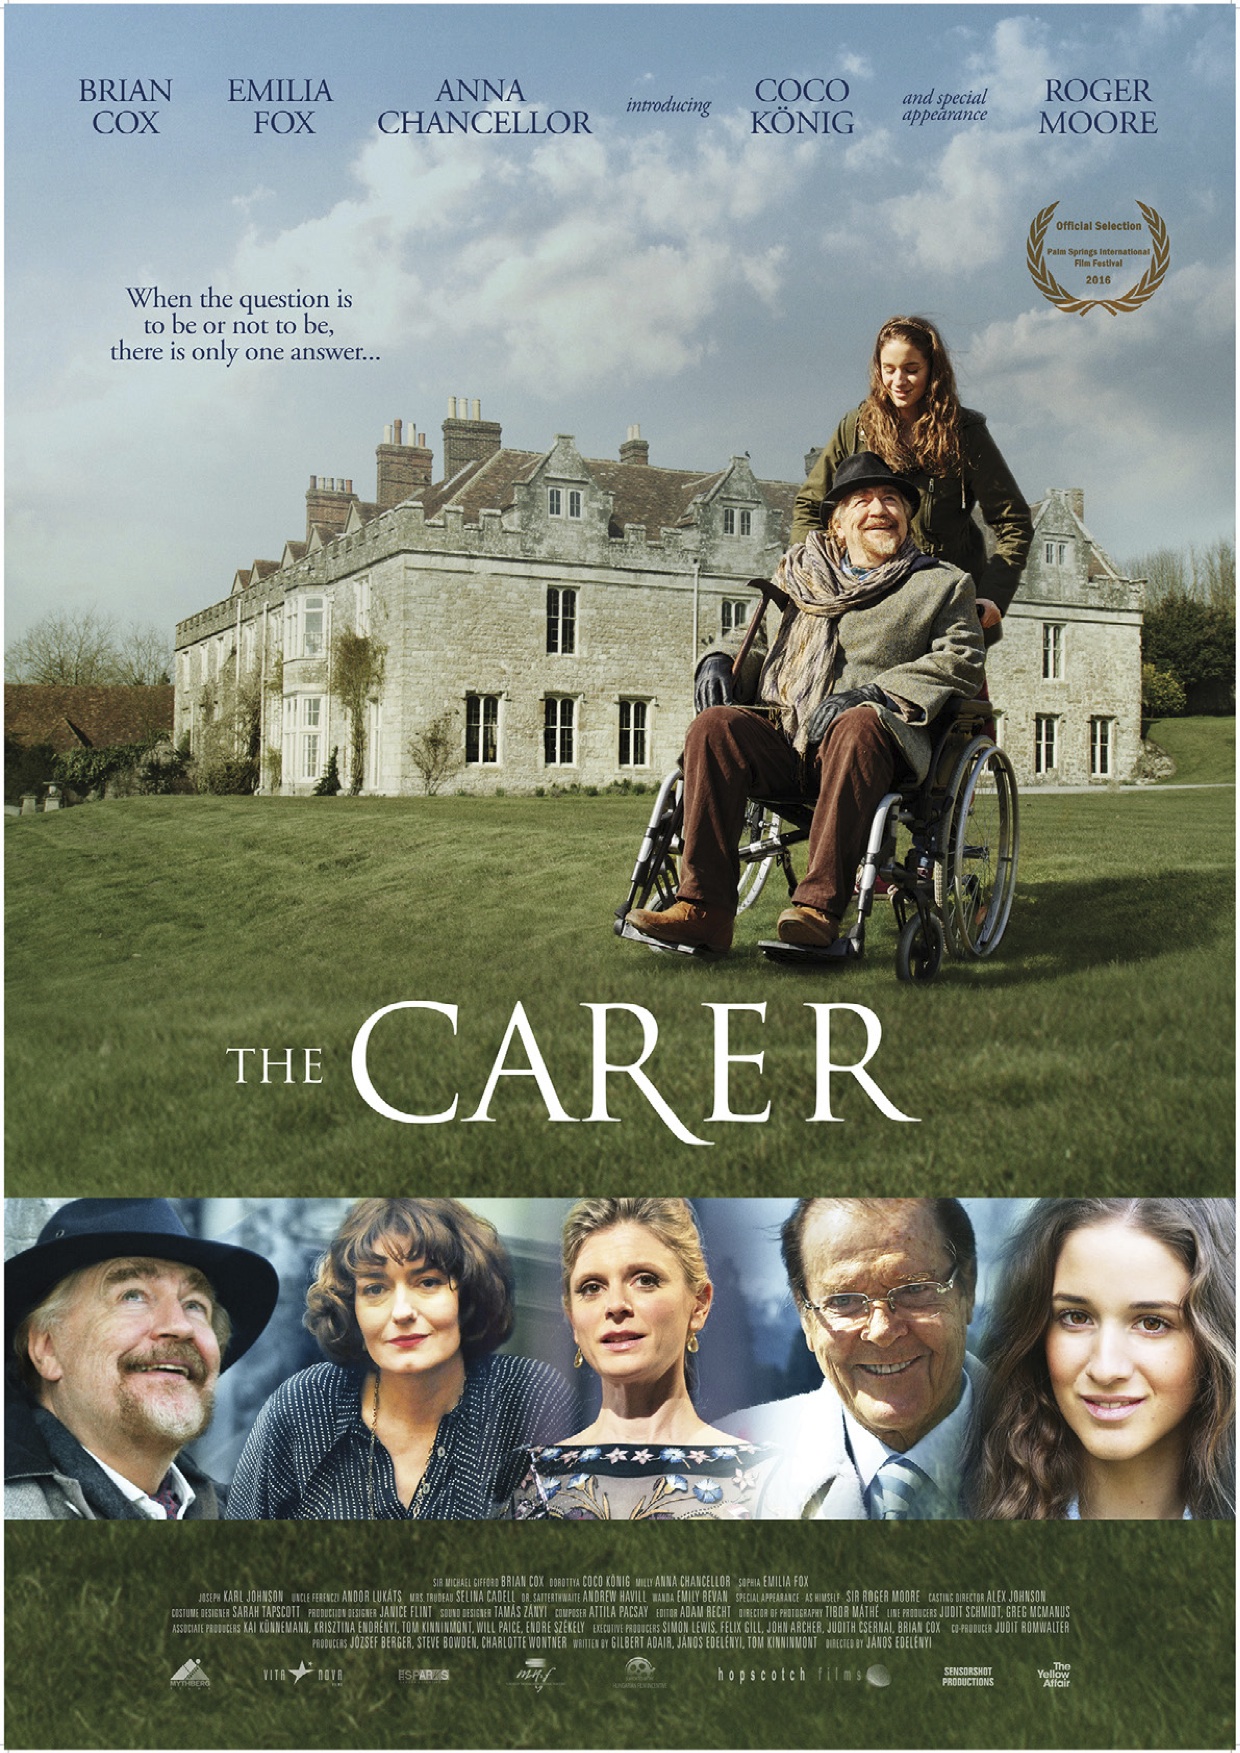 THE CARER